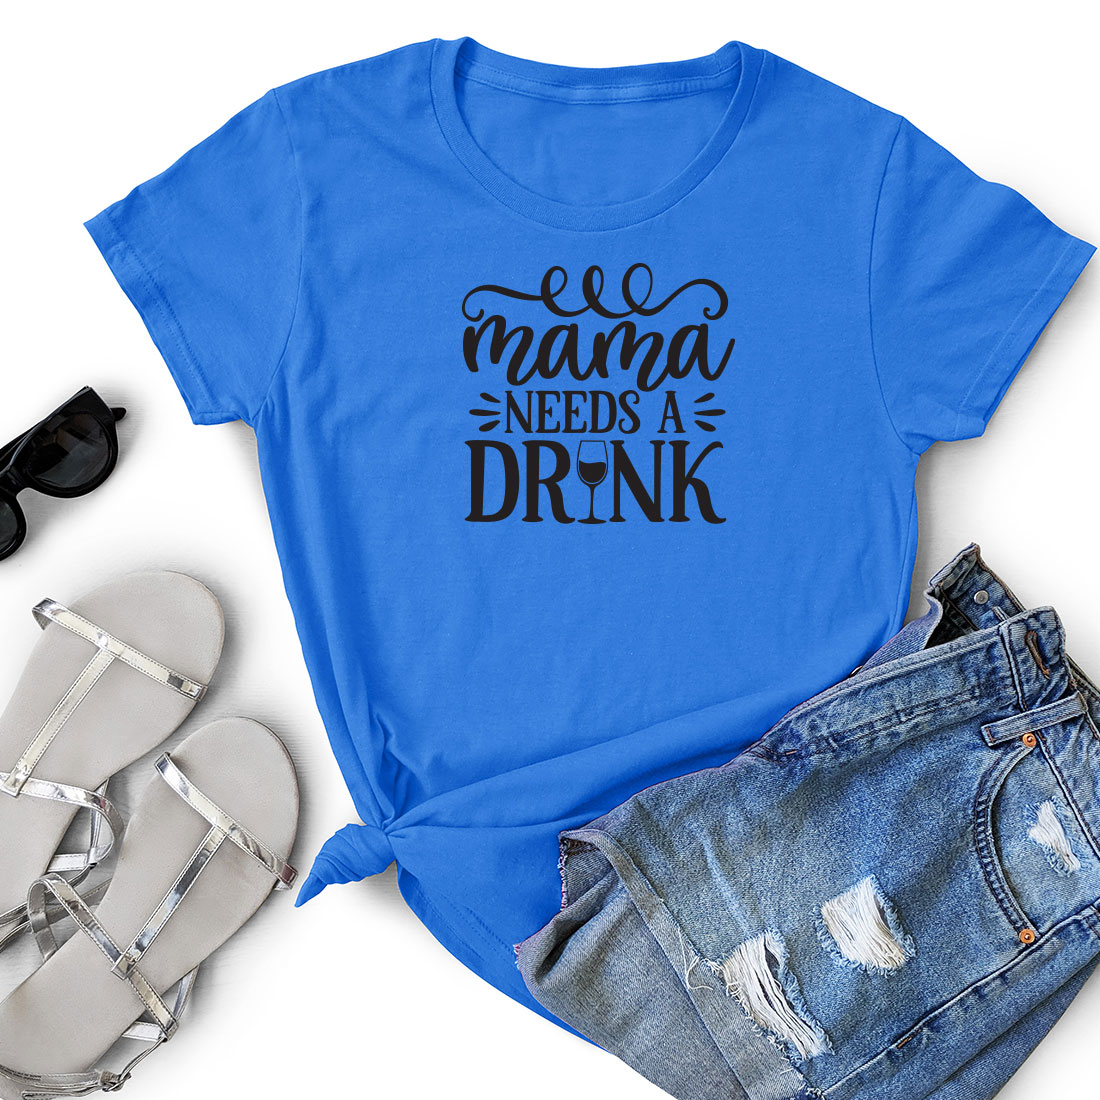 T - shirt that says mama needs a drink next to a pair of shorts.